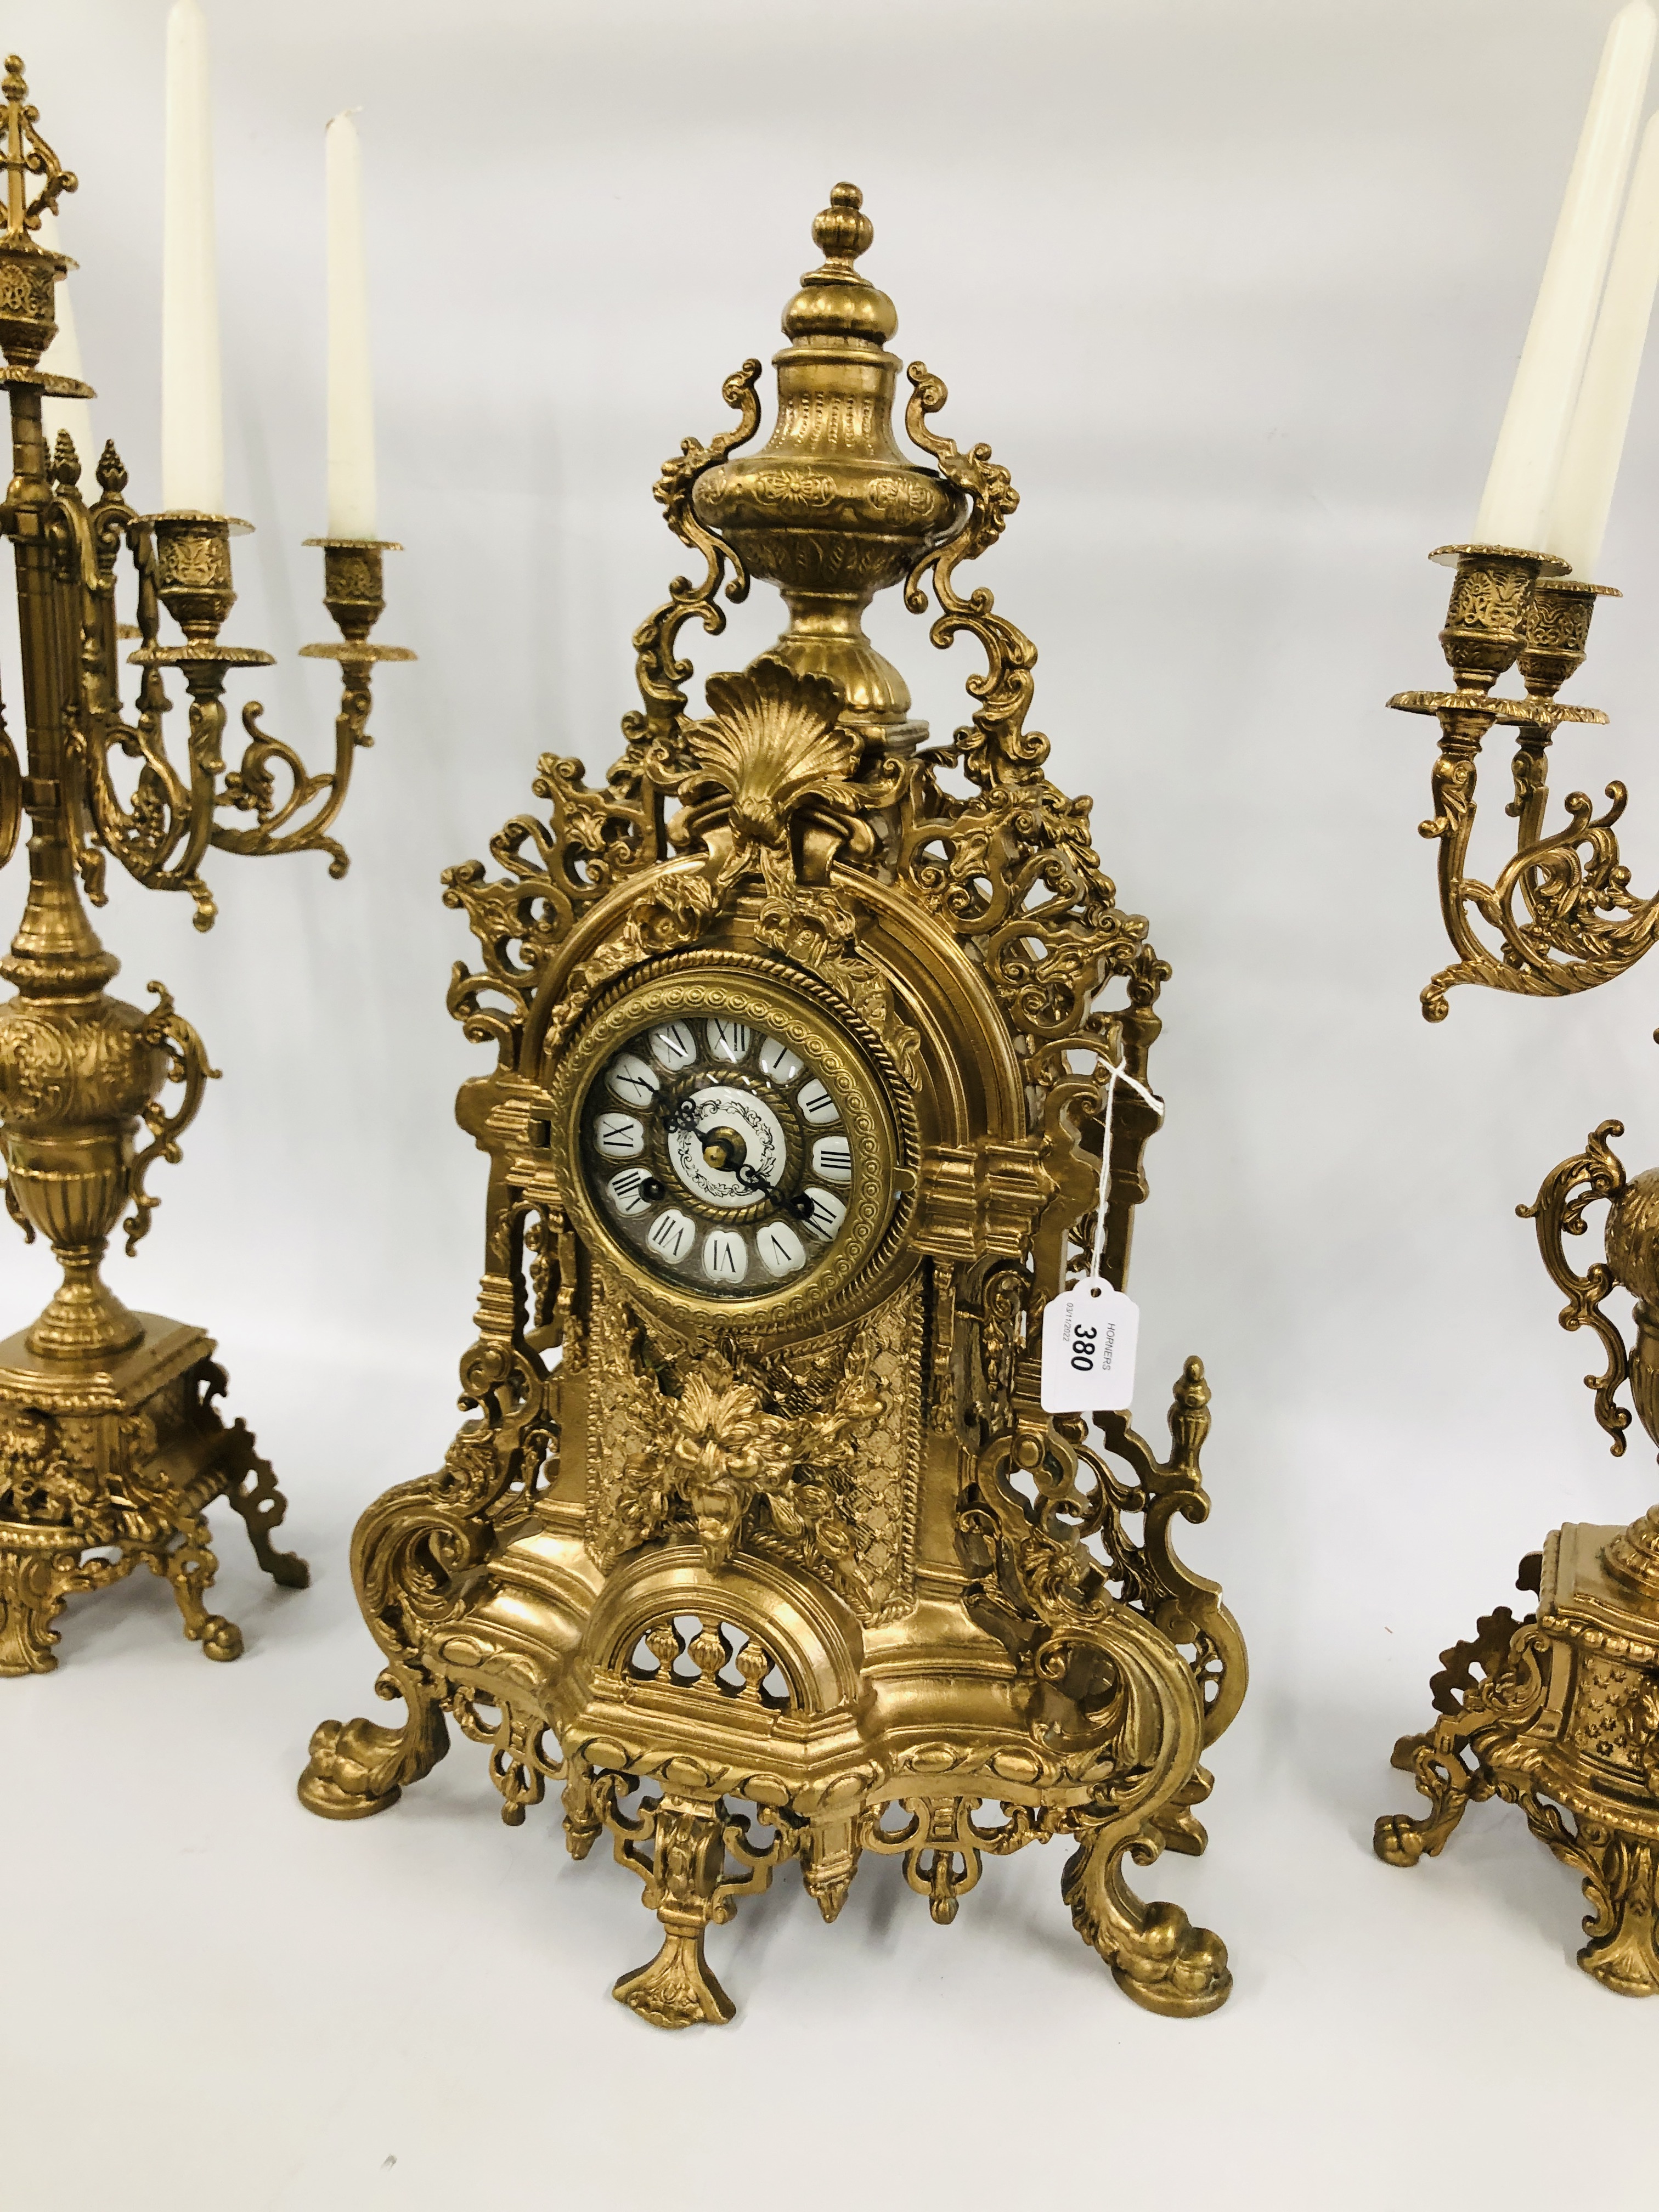 AN IMPRESSIVE CONTINENTAL ORNATE GILT METAL MANTEL TIME PIECE AND PAIR OF SIX POT CANDELABRA - Image 3 of 7